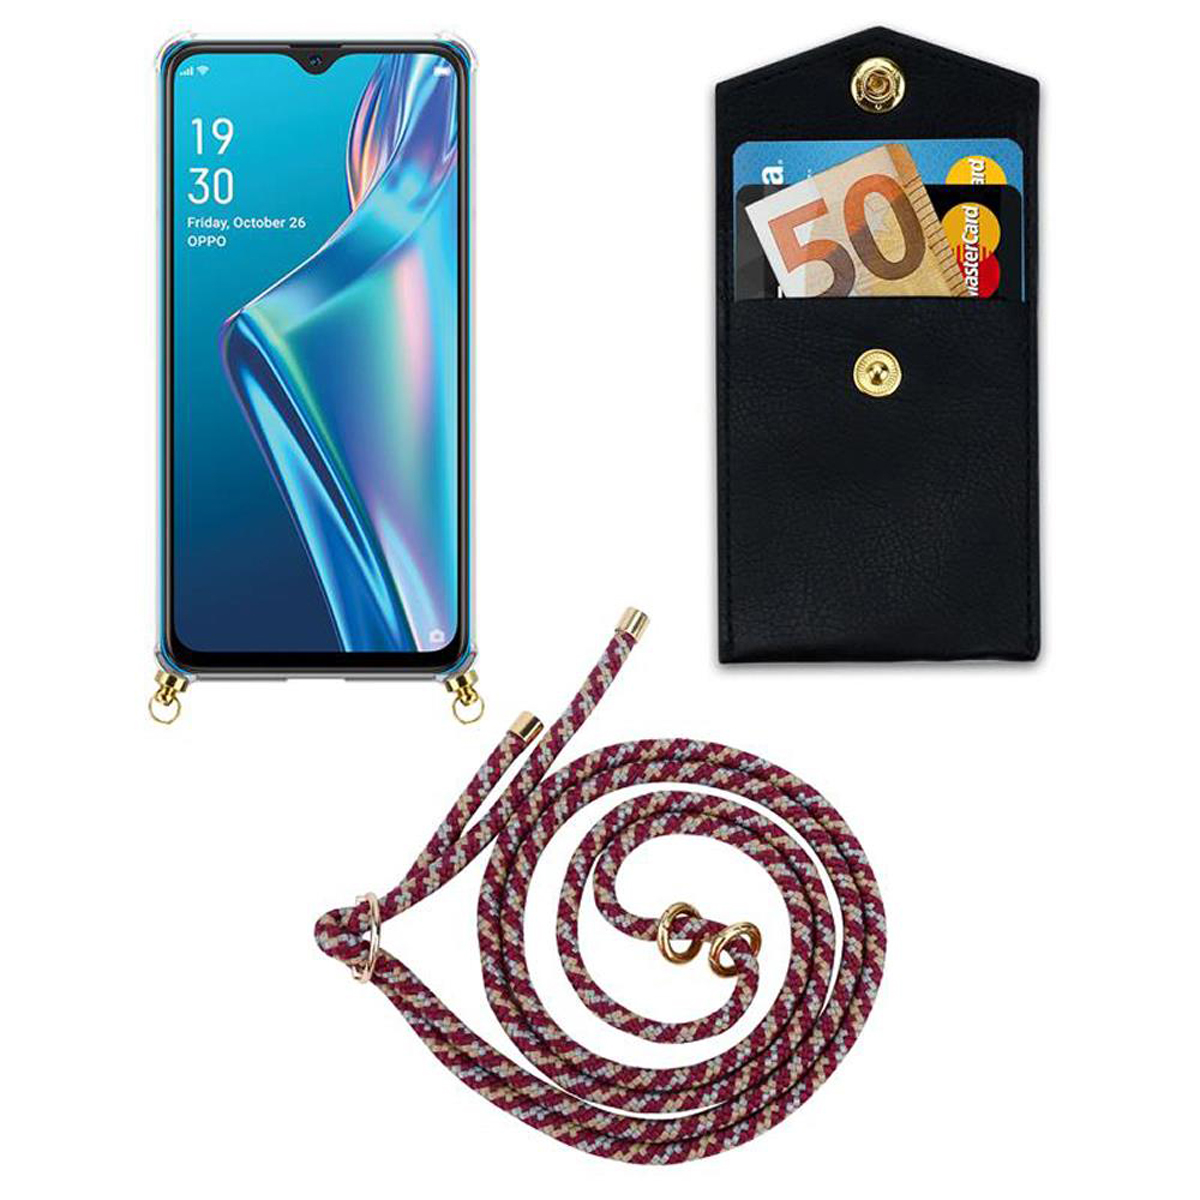 CADORABO Ringen, ROT WEIß Hülle, A12, Backcover, GELB Kette Band und Gold Oppo, abnehmbarer mit Kordel Handy